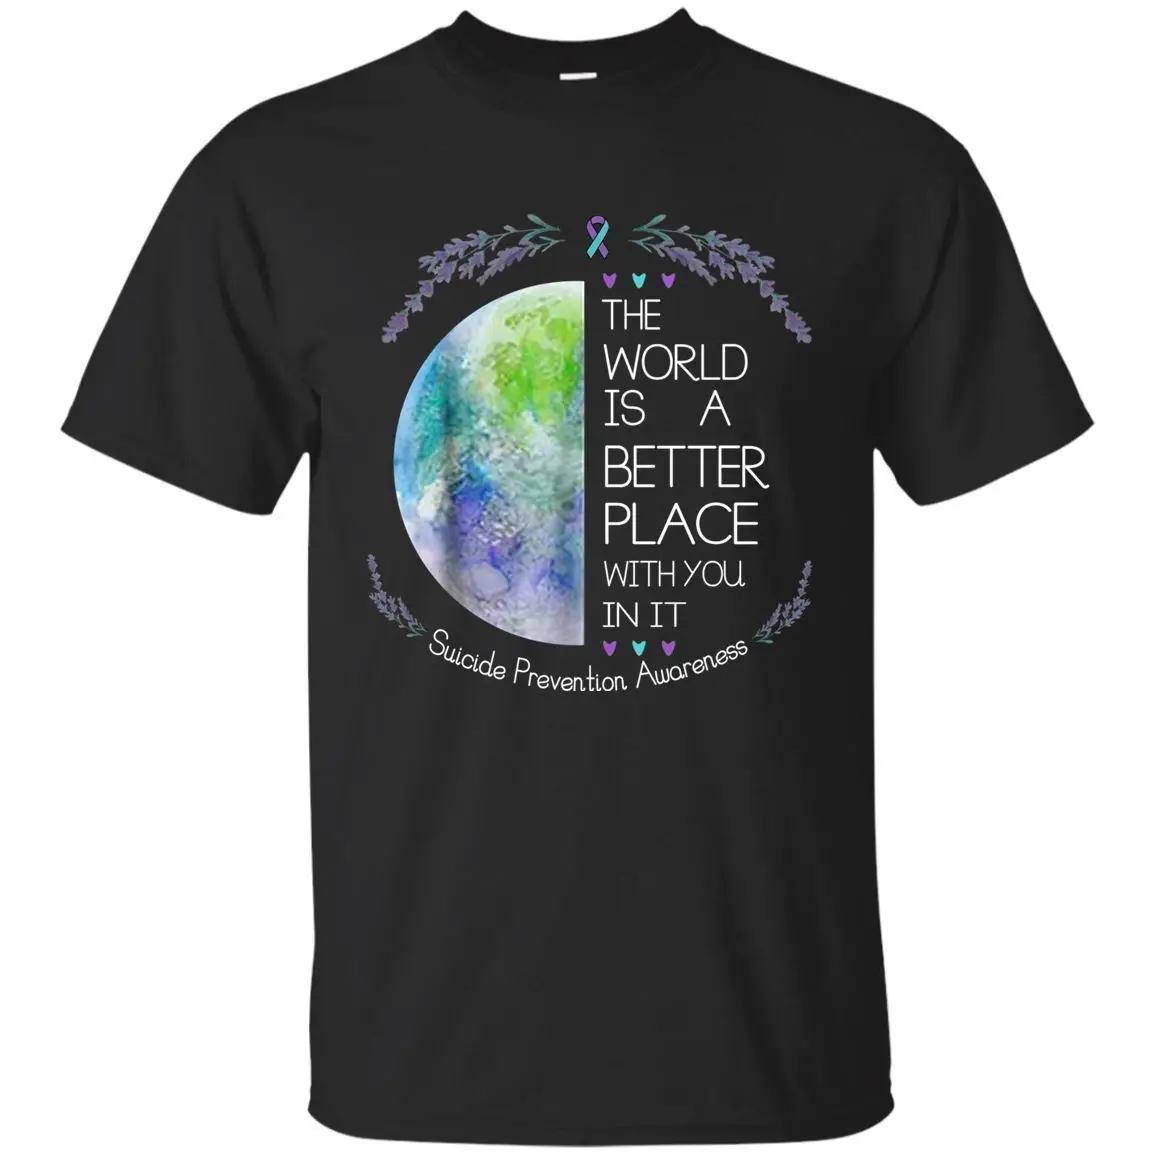 

World Is A Better Place with You In It. Suicide Prevention Awareness T-Shirt 100% Cotton O-Neck Short Sleeve Casual Mens T-shirt